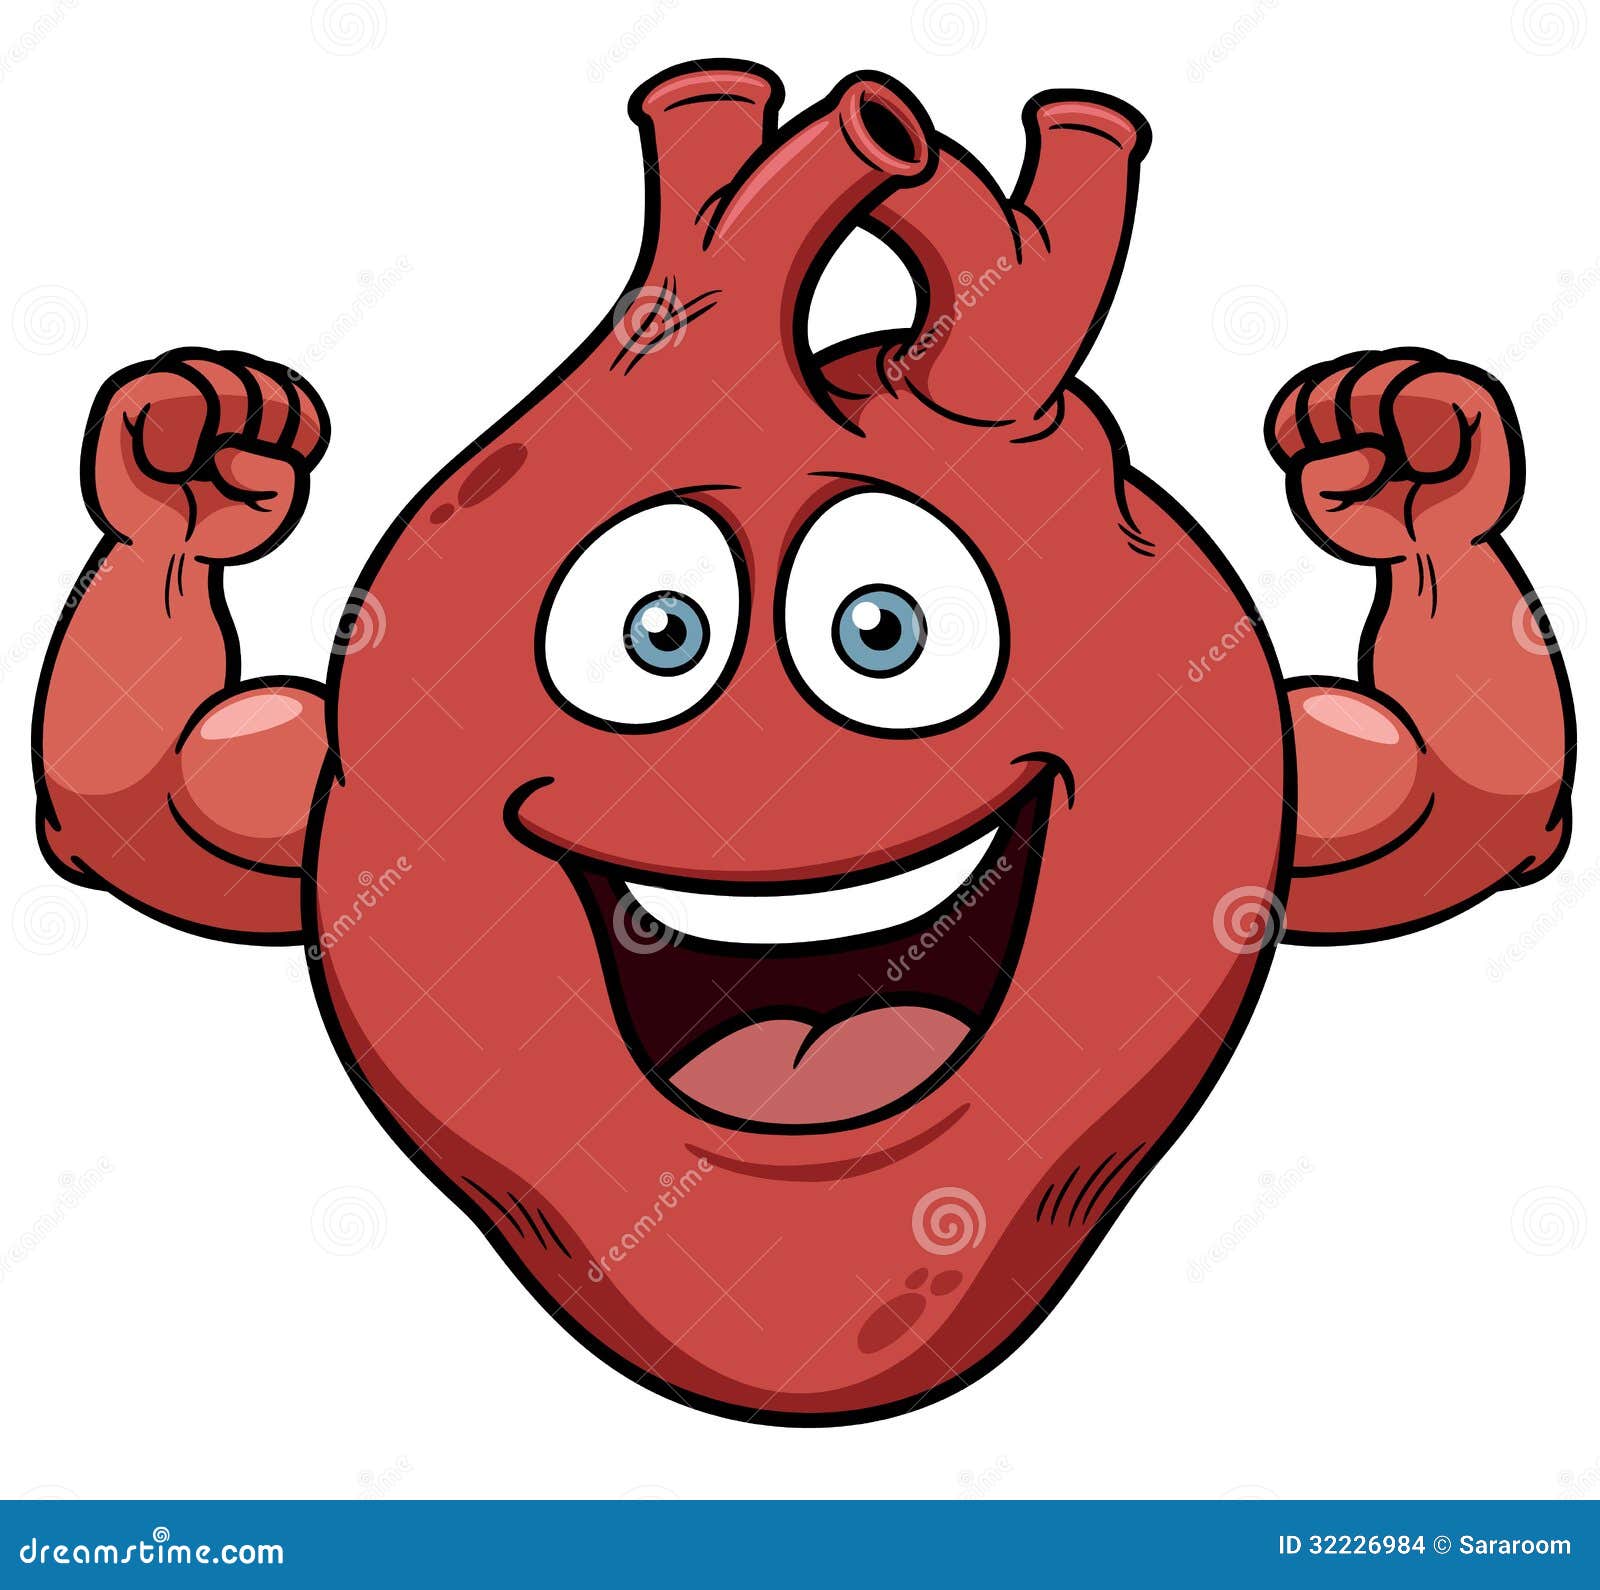 free strong heart clipart - photo #17